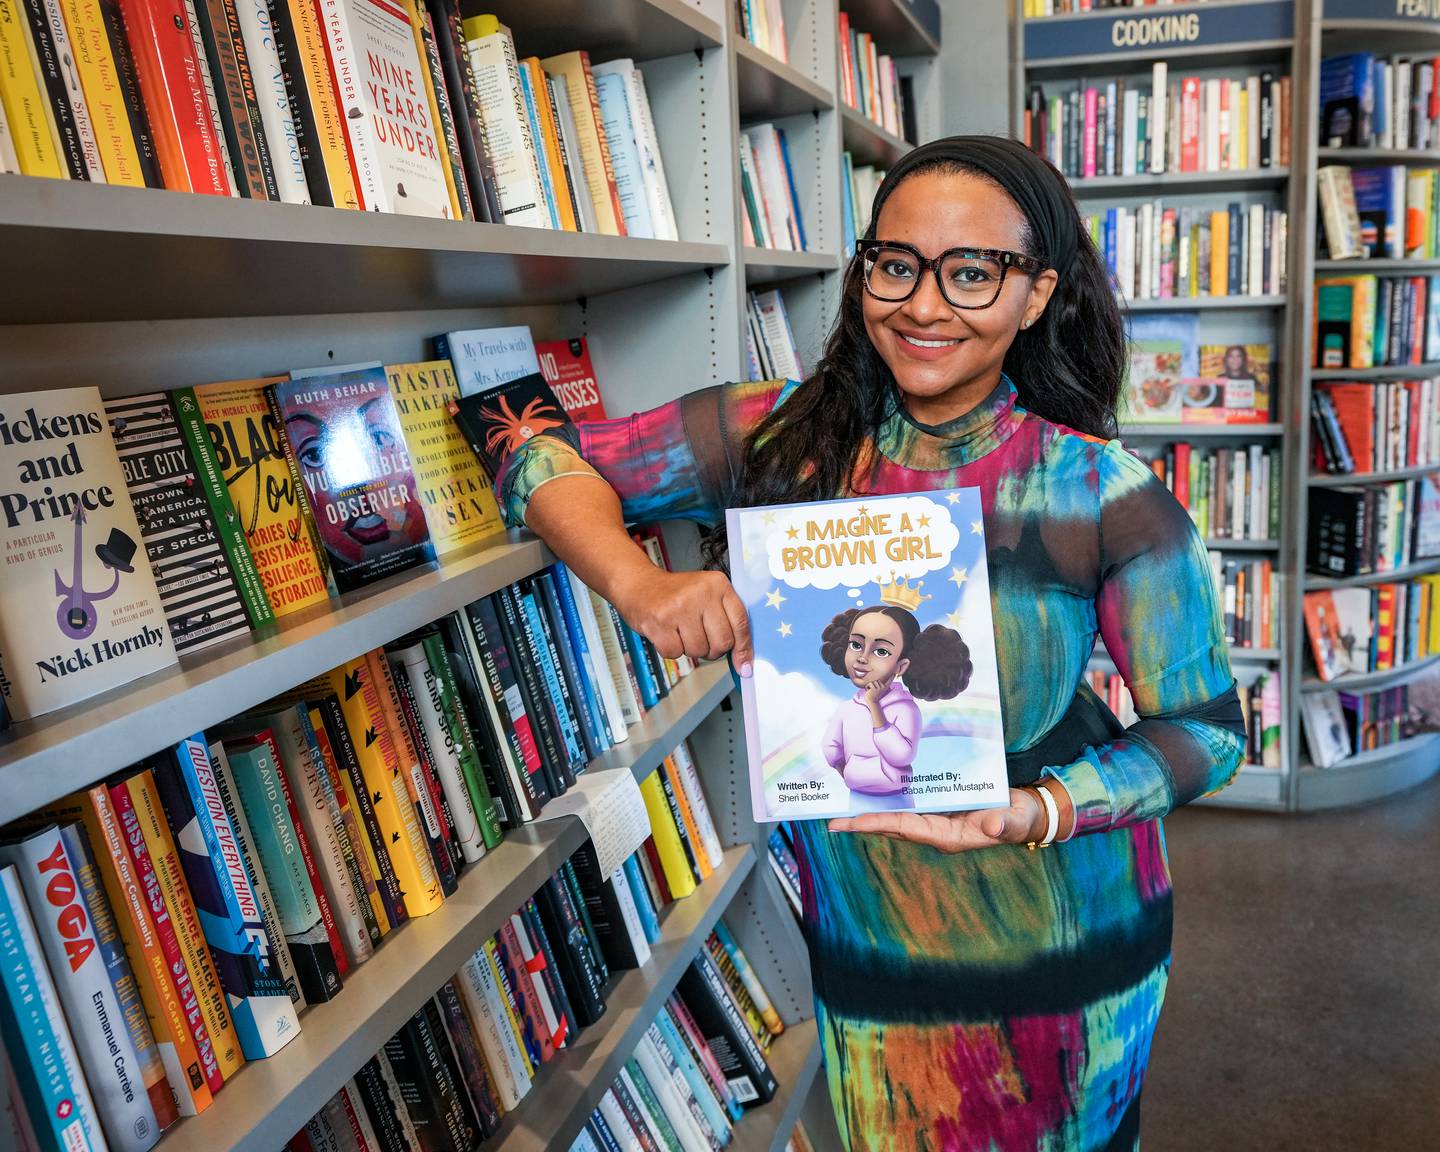 Inside of the bookstore, Bird in Hand, Sheri Booker takes a portrait holding her new children's book, in Charles Village, Md., on November 19, 2022. Booker teaches multiplatfrom production at Morgan State University.